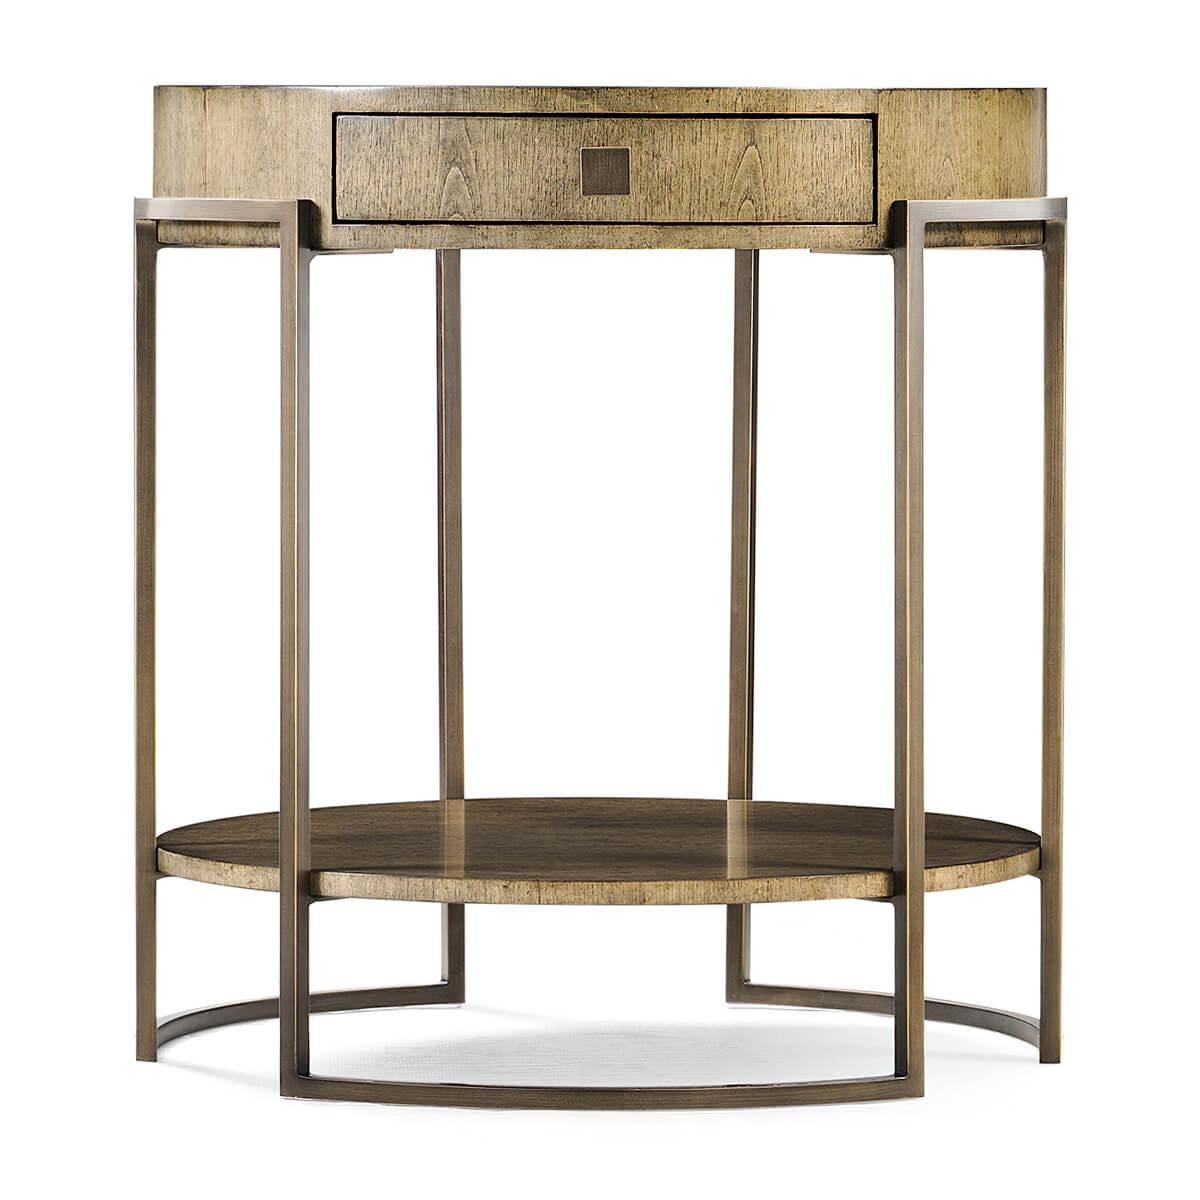 A modern chestnut round side table with a single frieze drawer and an iron under-tier with a light bronze finish.
Dimensions: 24